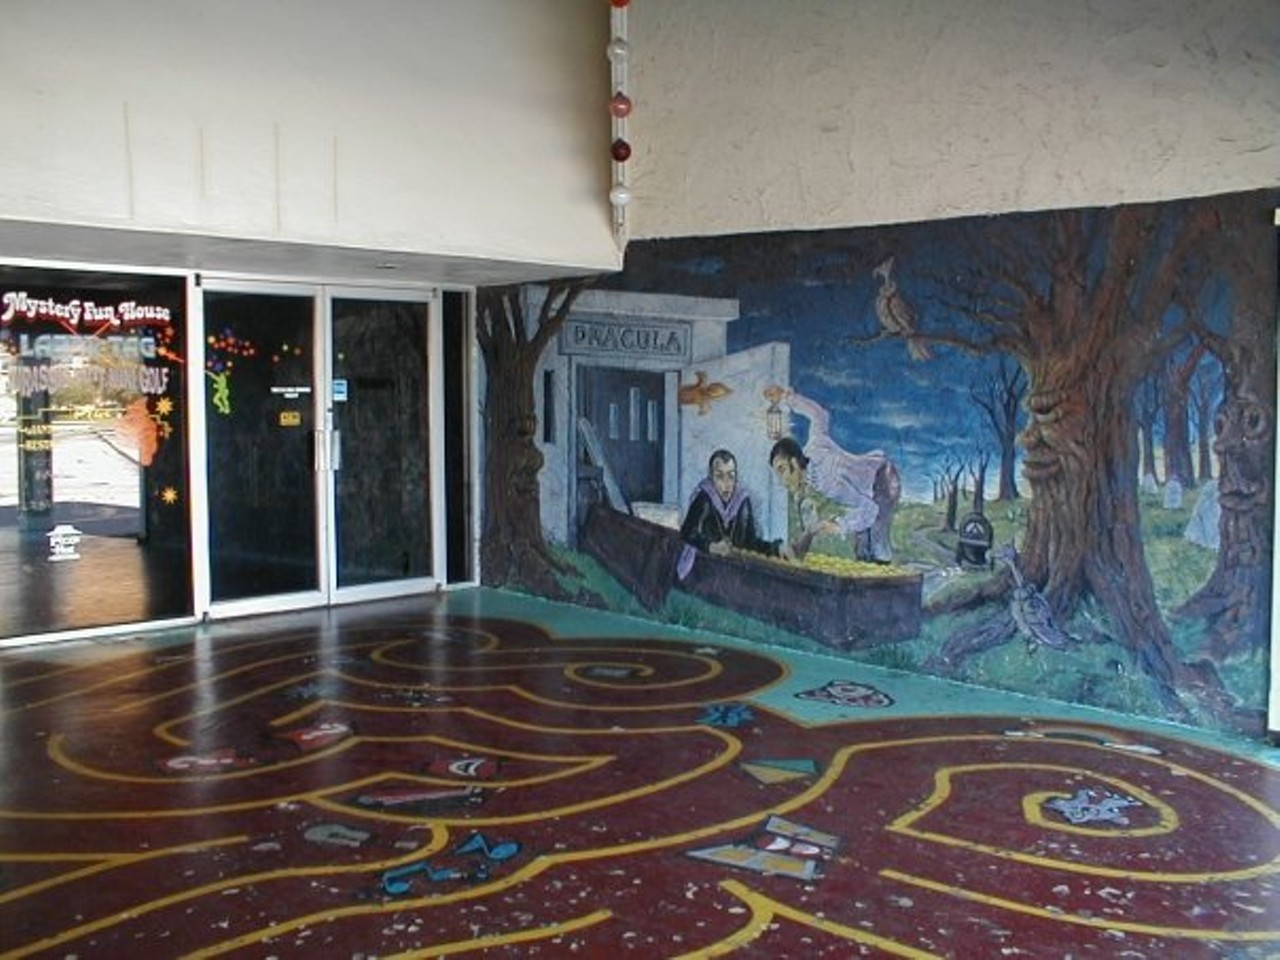 Crazy murals were painted at the entrance. (image via facebook.com/mysteryfunhouse)